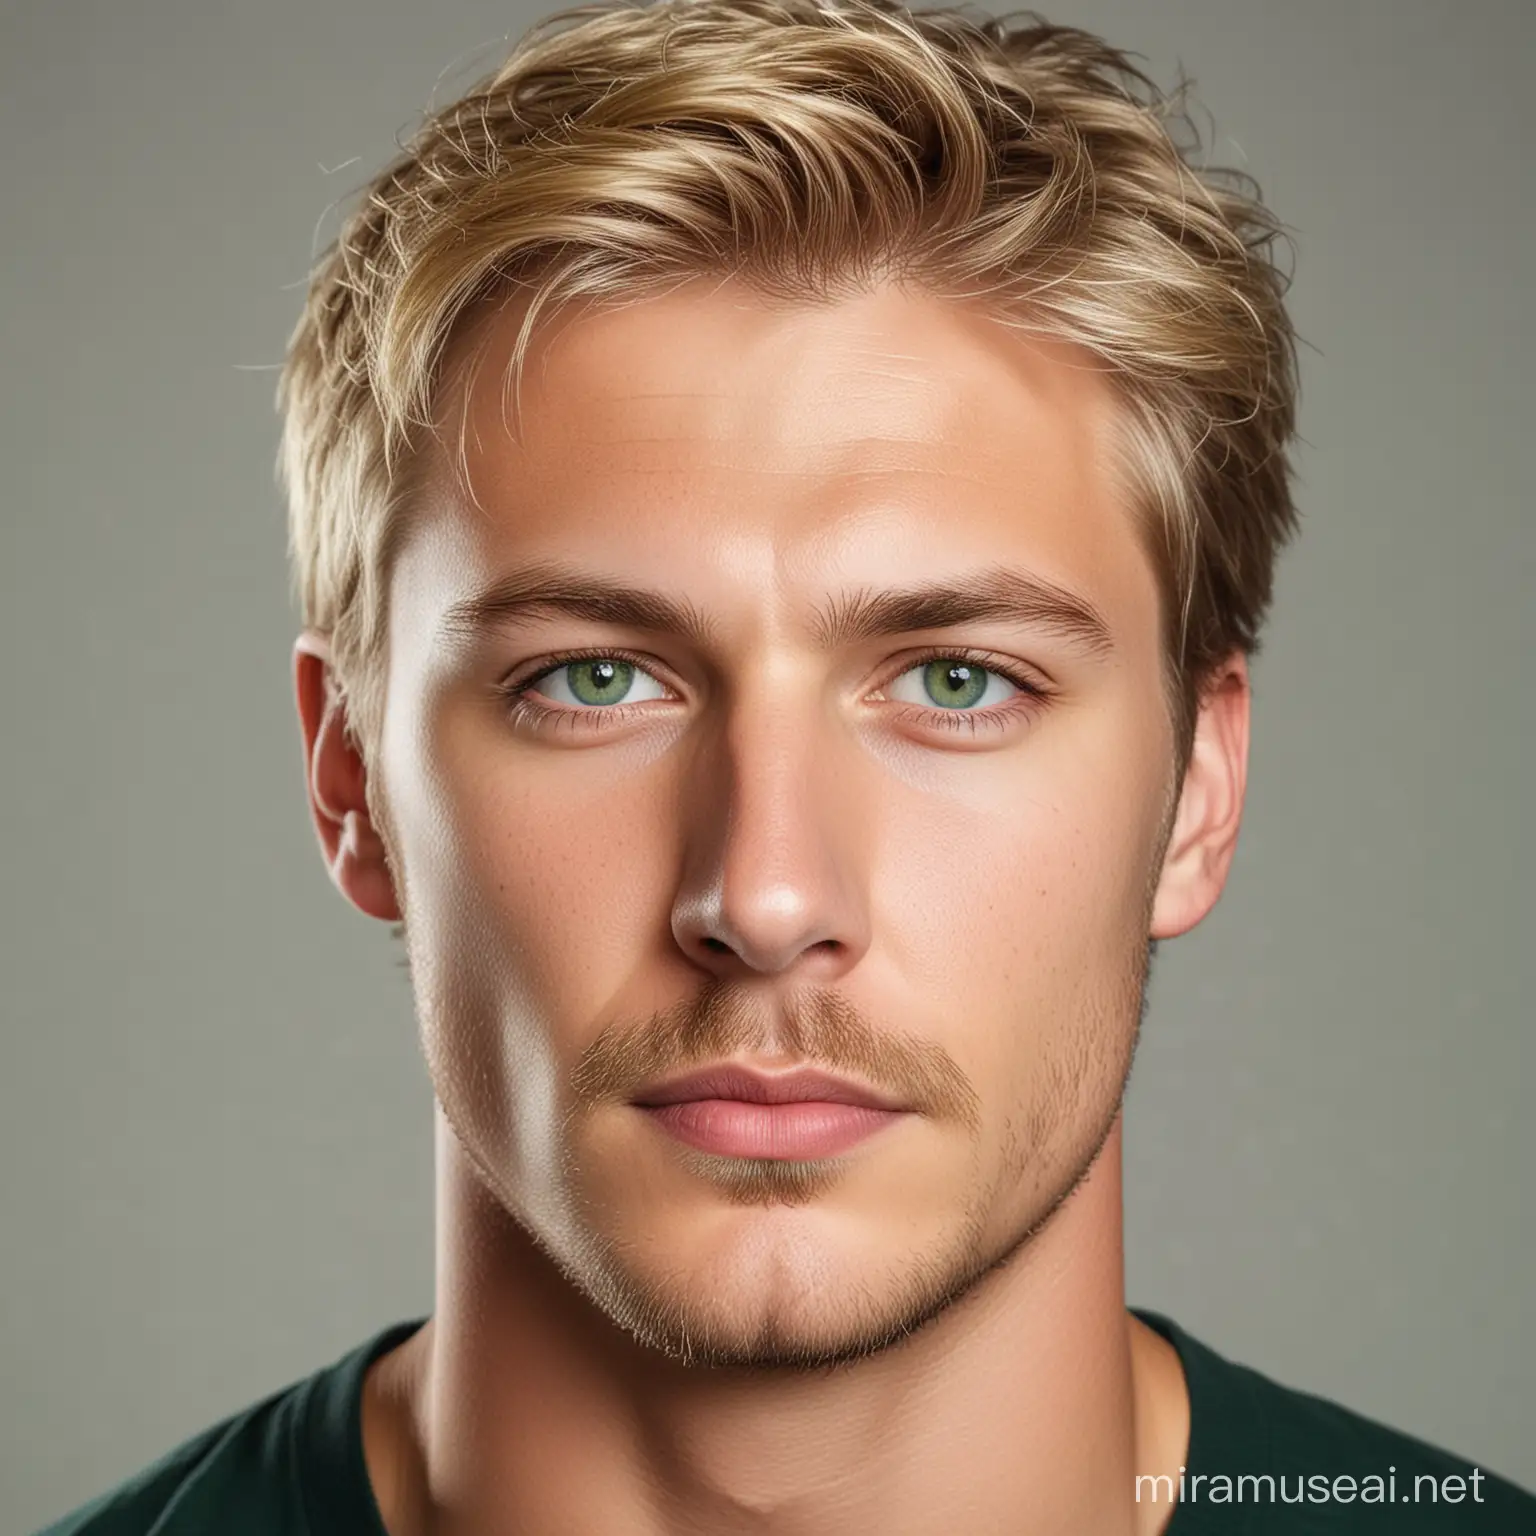 Scandinavian Male Portrait with Blond Hair and Green Eyes